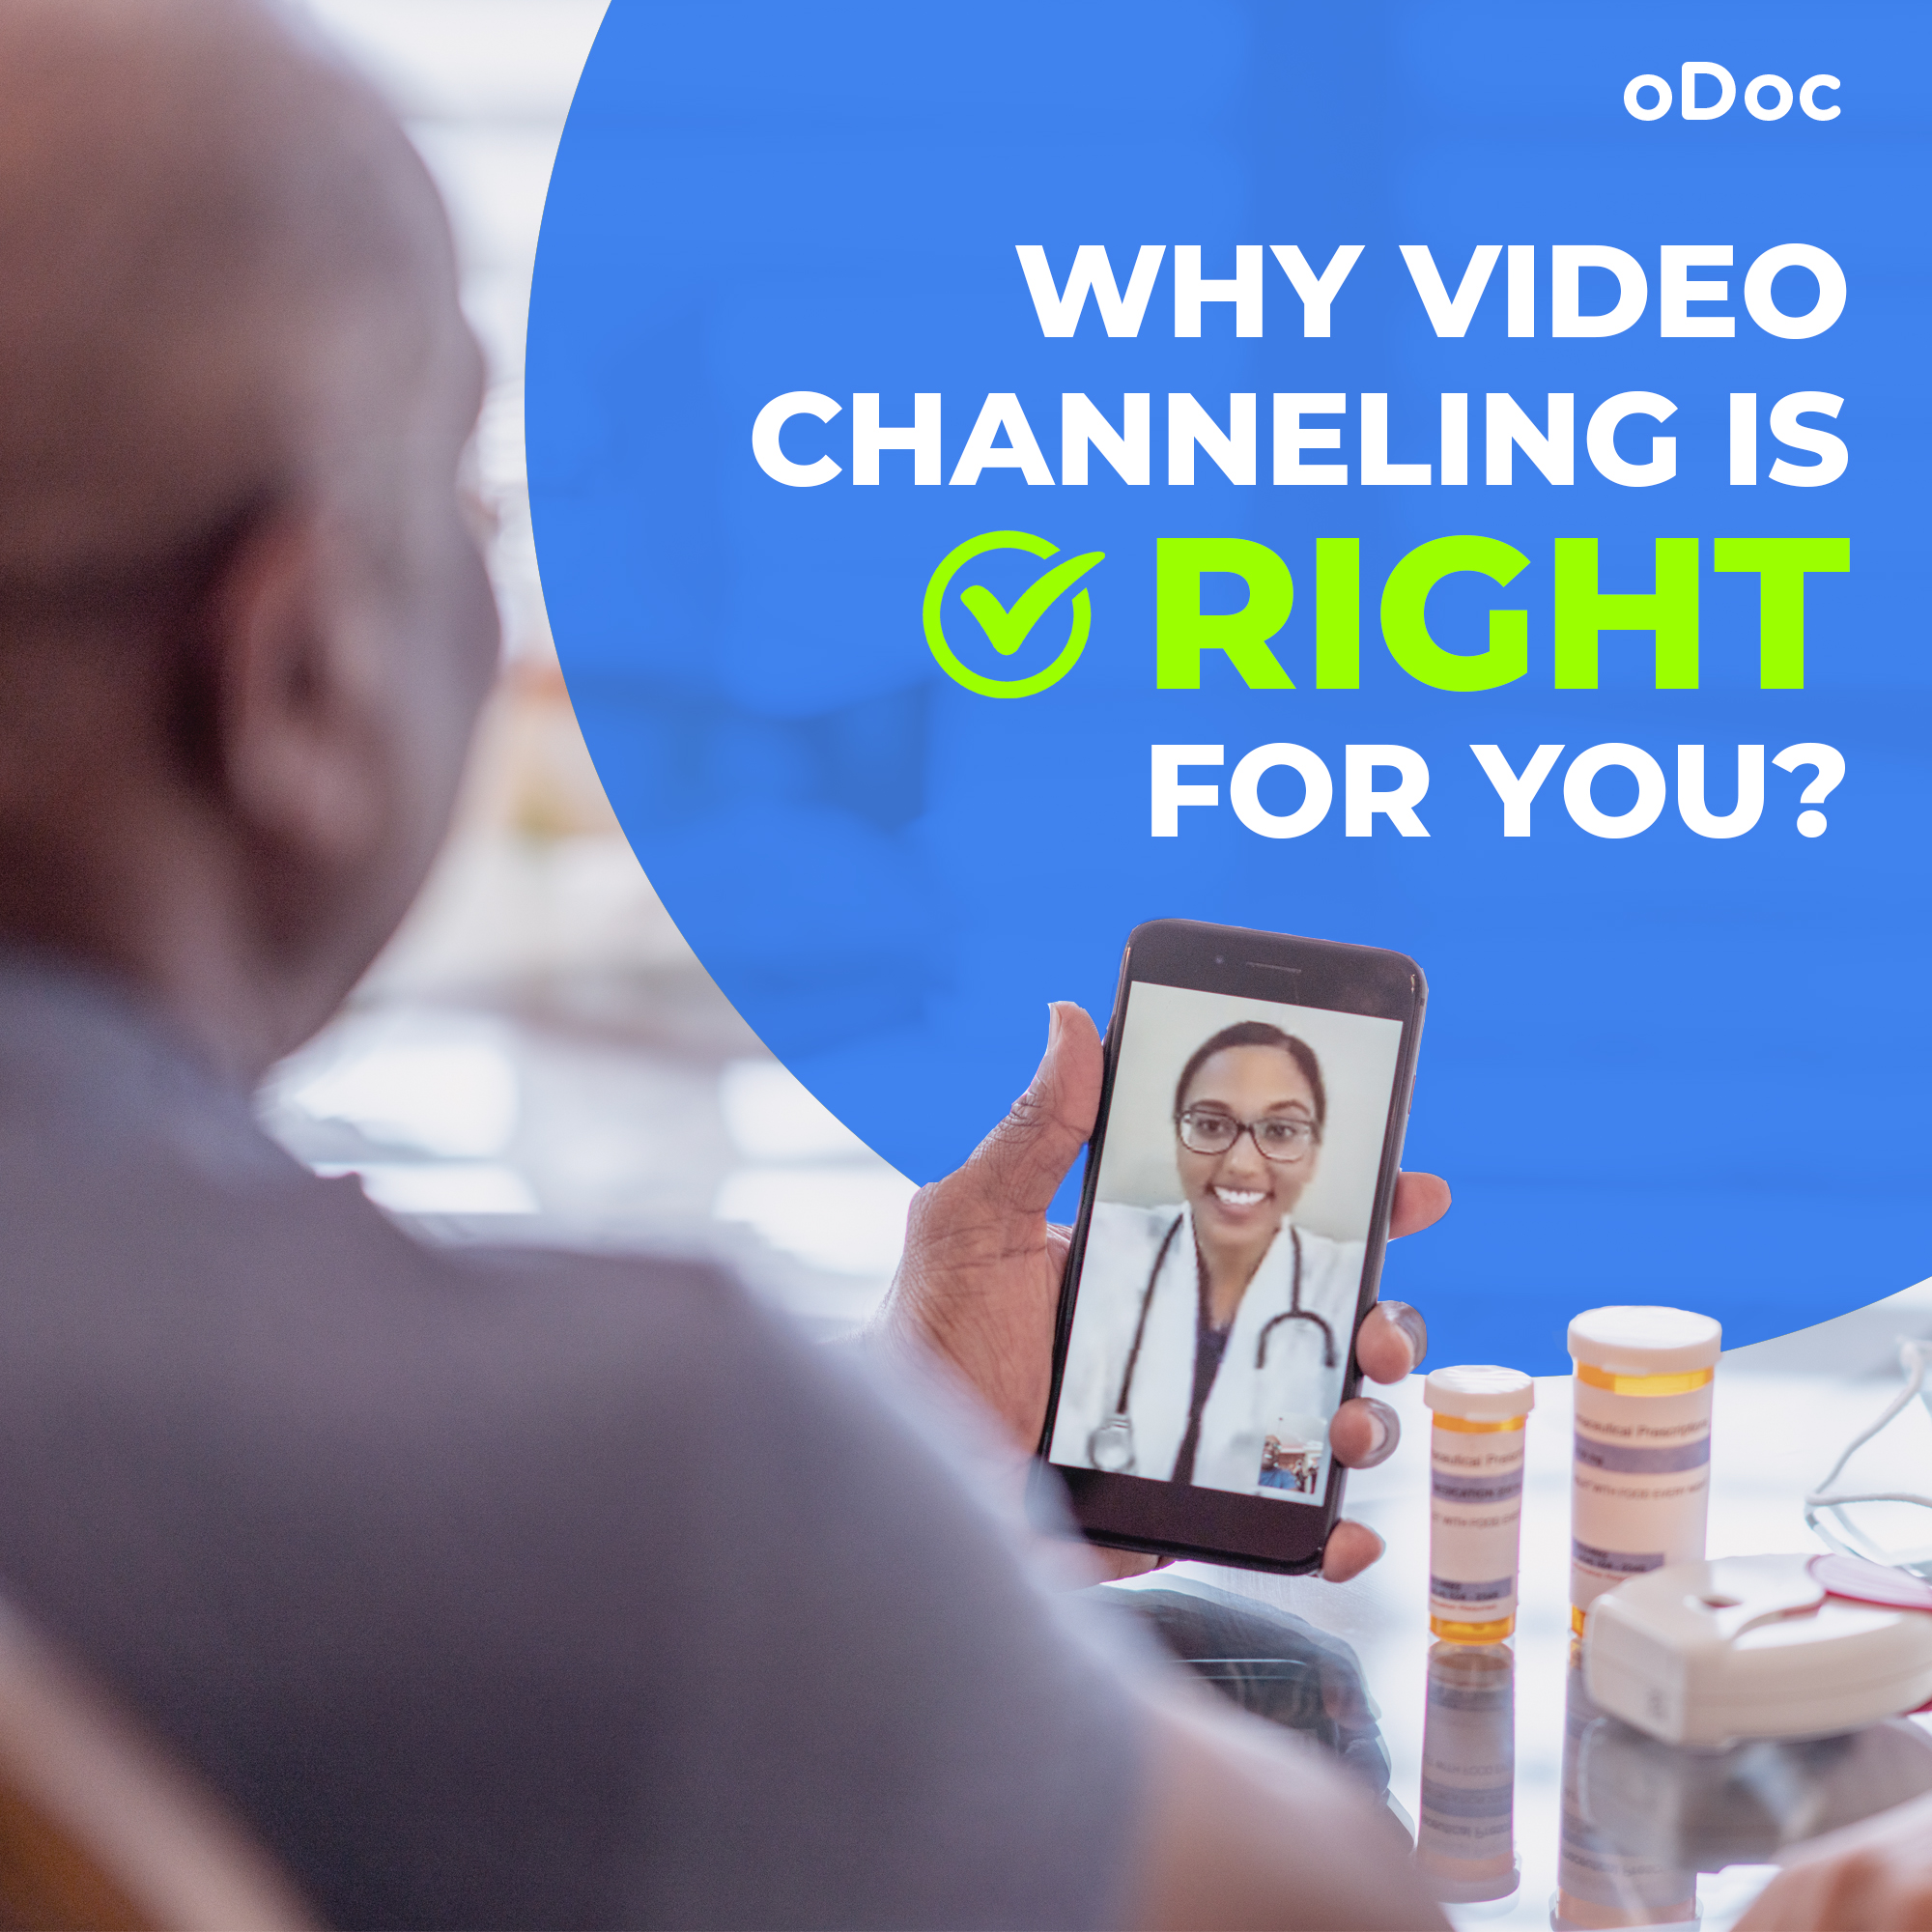 Why Video Channeling Is Right For You